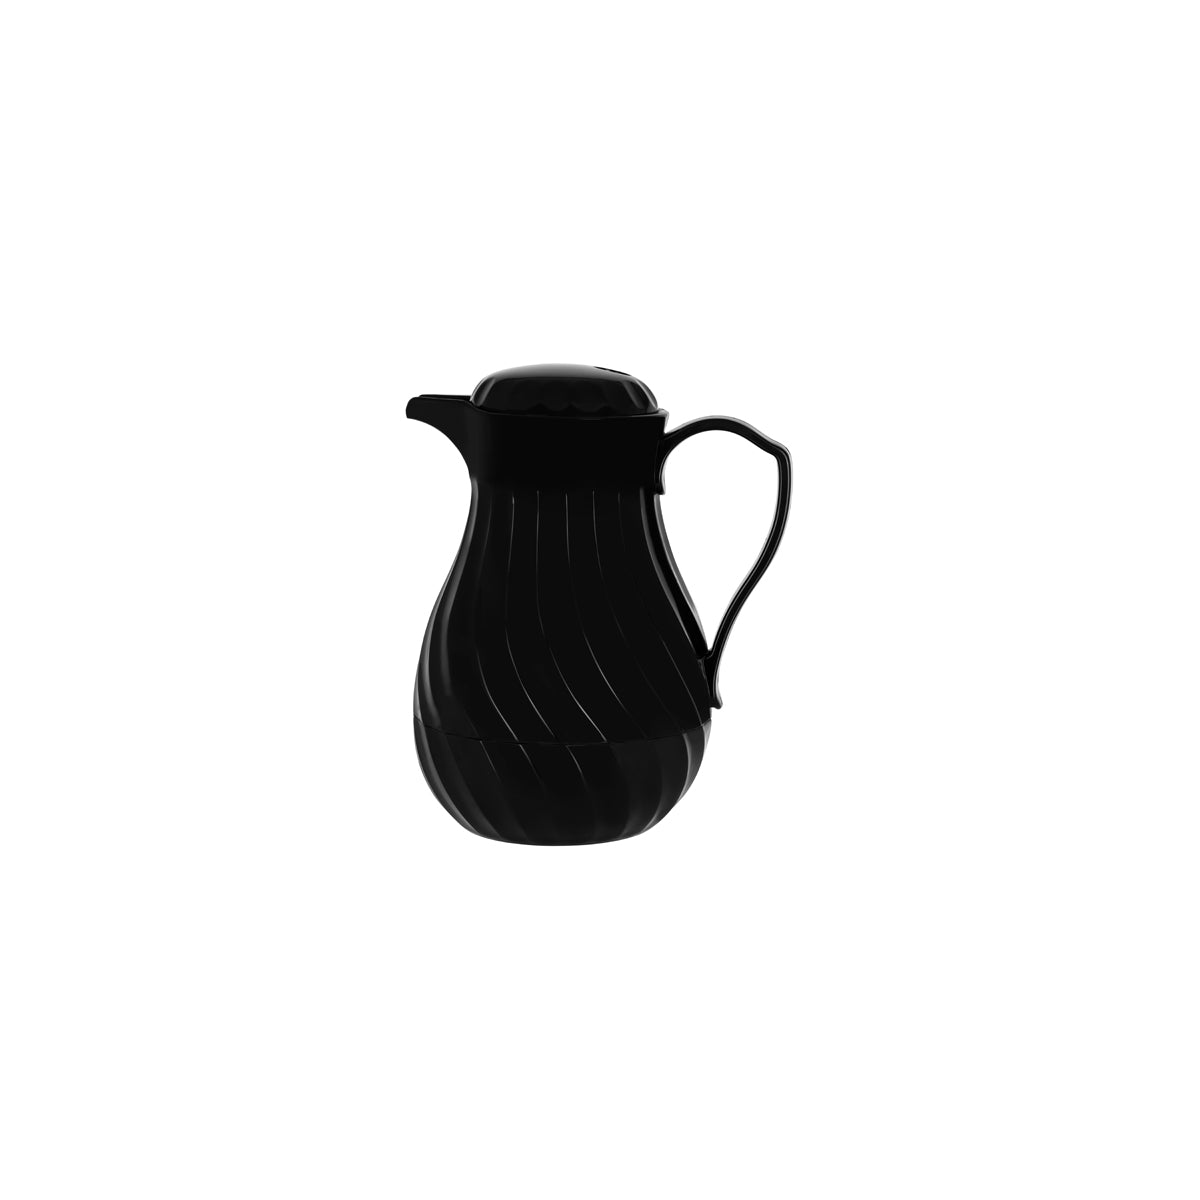 Buy Wholesale China Victoria Beverage Jug, Glass Pitcher With